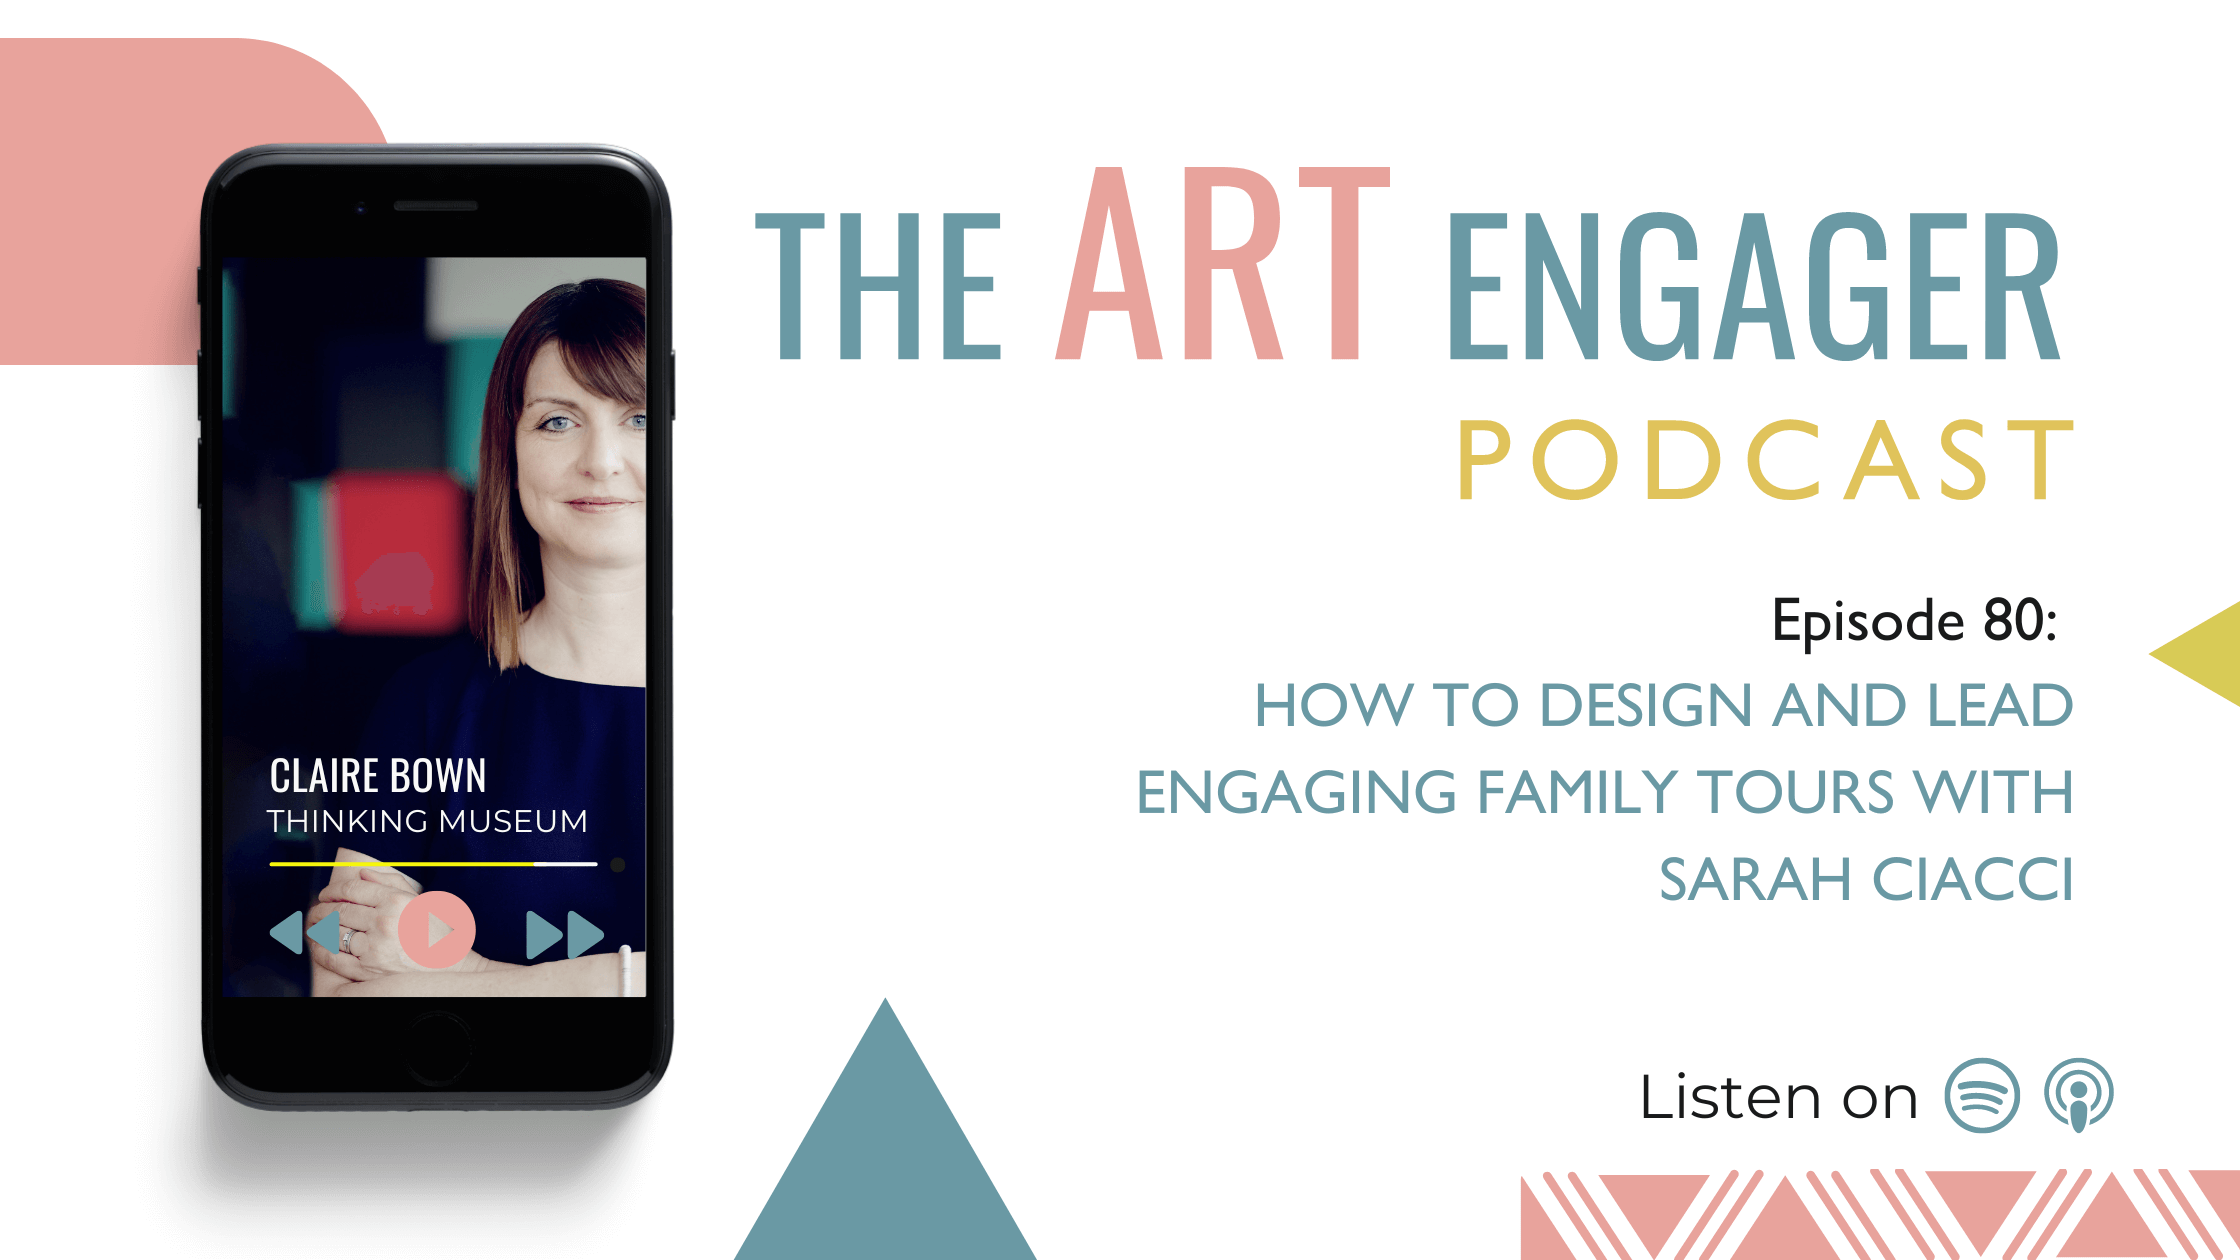 How to design and lead engaging family tours with Sarah Ciacci